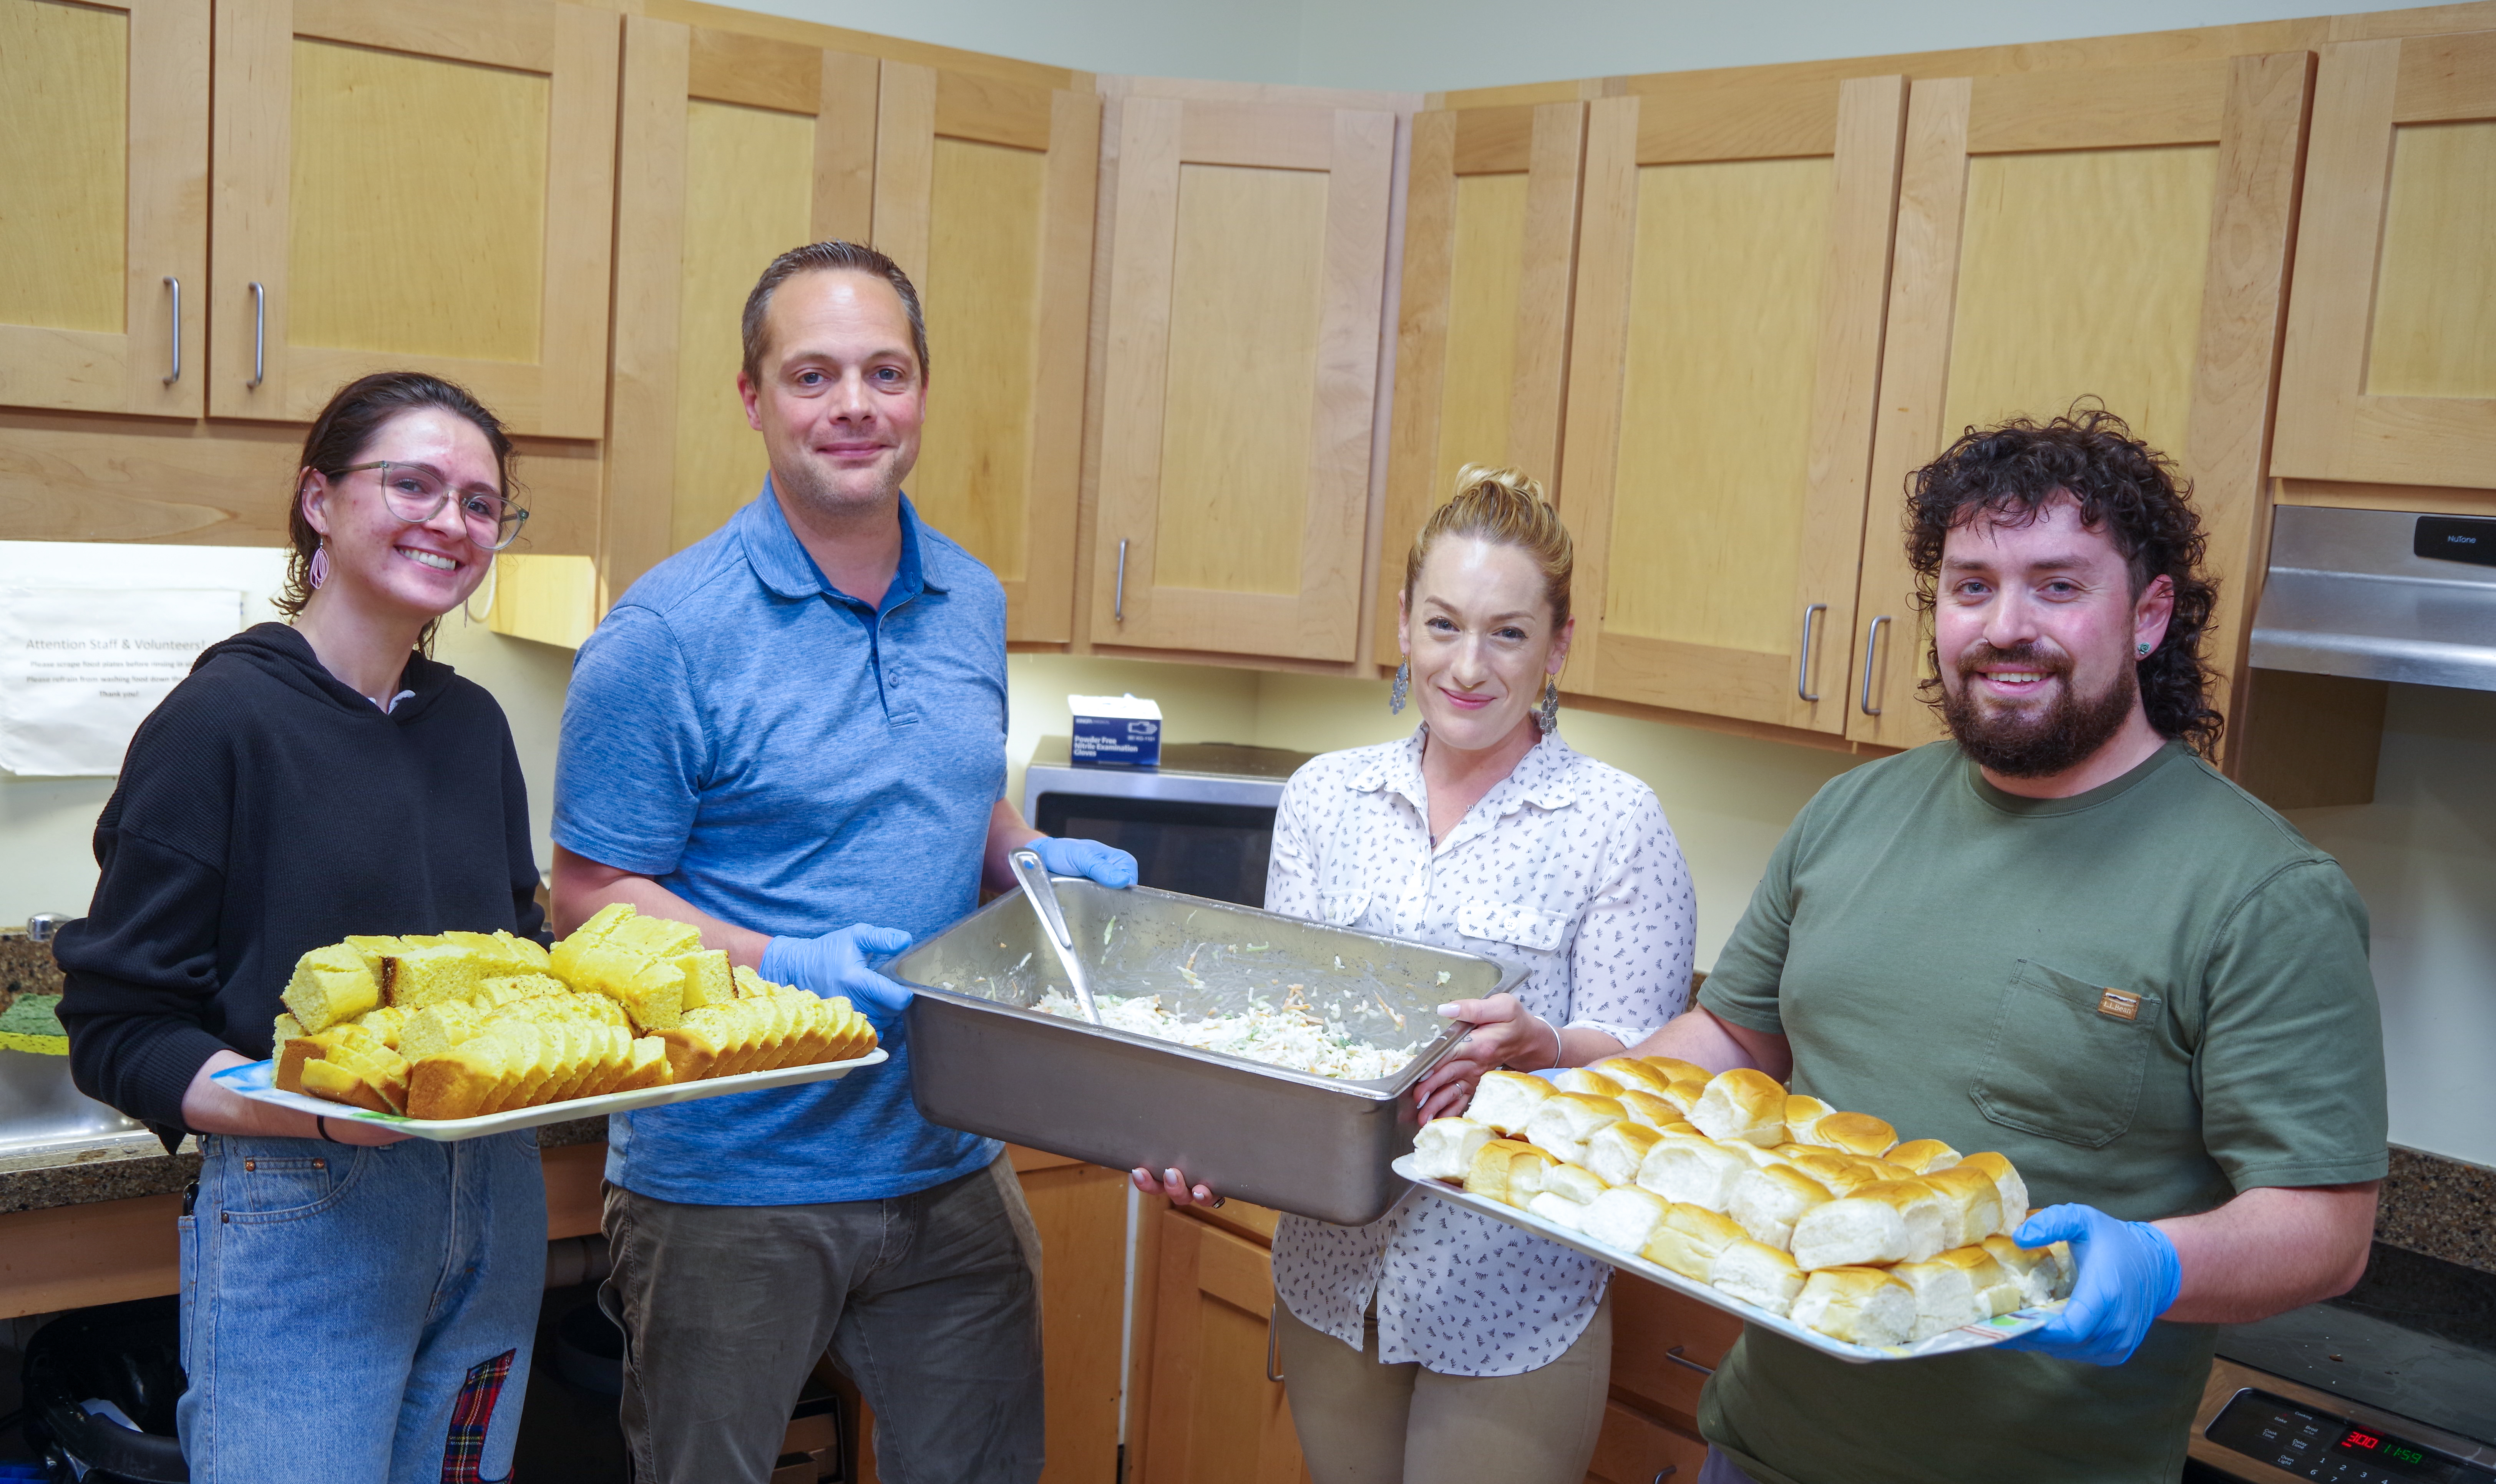 Four COTS volunteers in the shelter kitchen, holding serving trays filled with hot food.